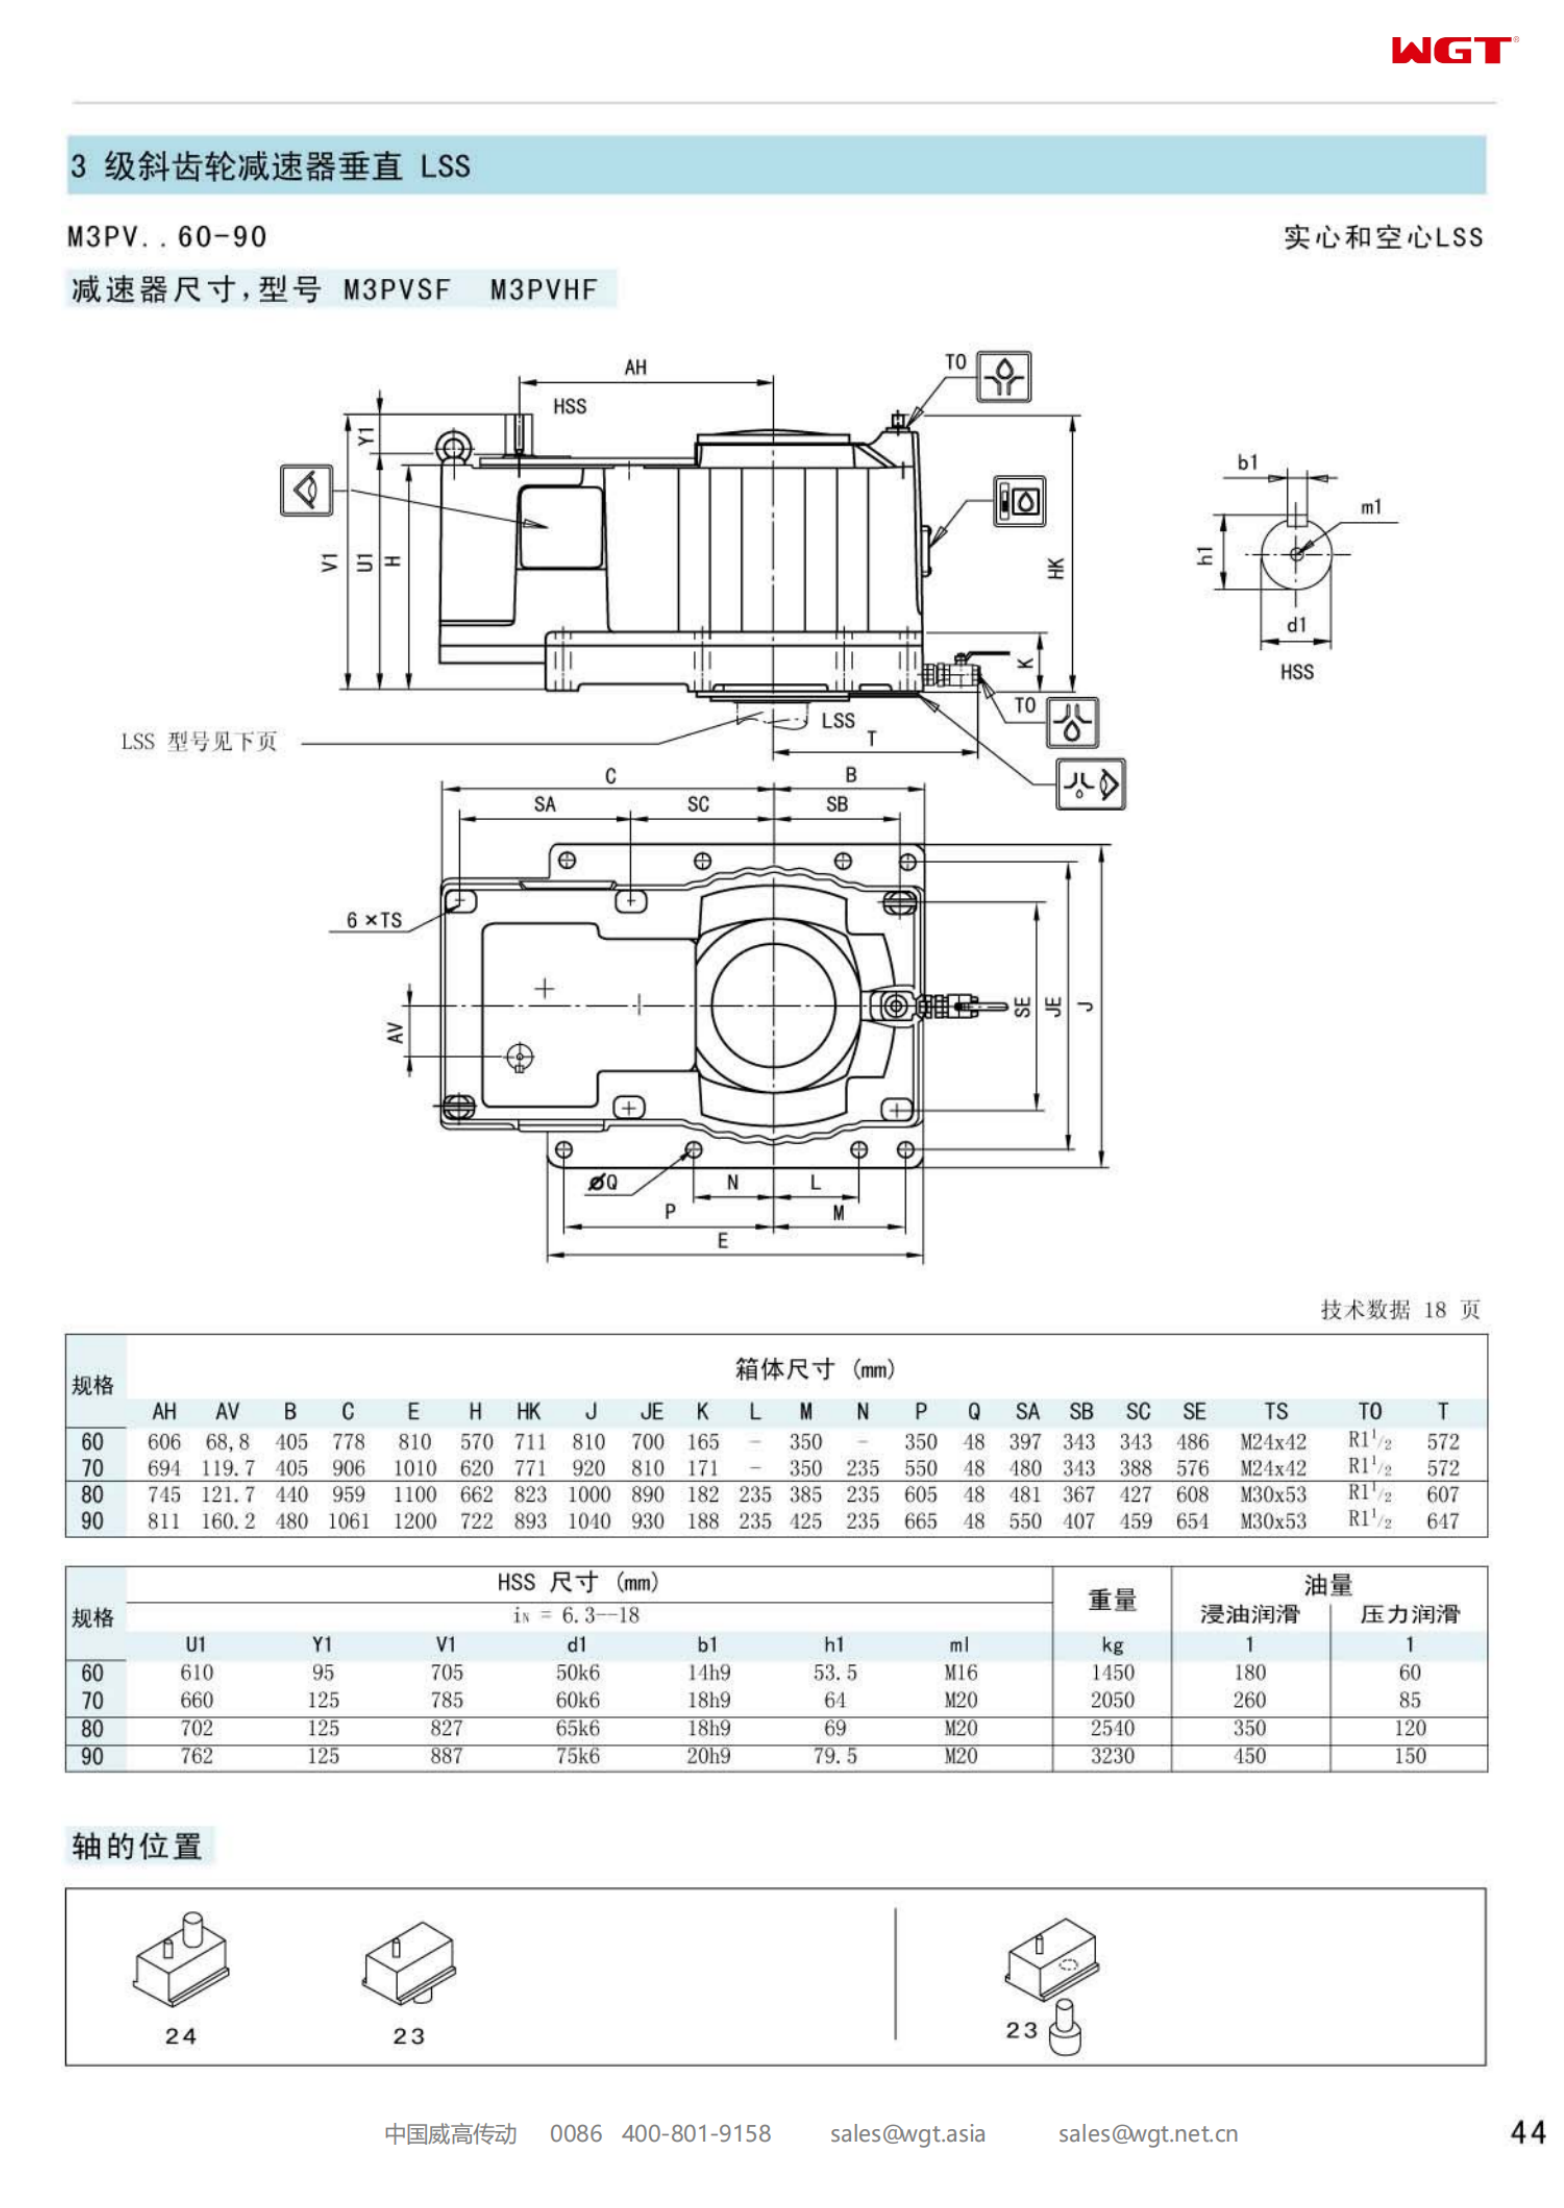 M3PVHF90 Replace_SEW_M_Series Gearbox